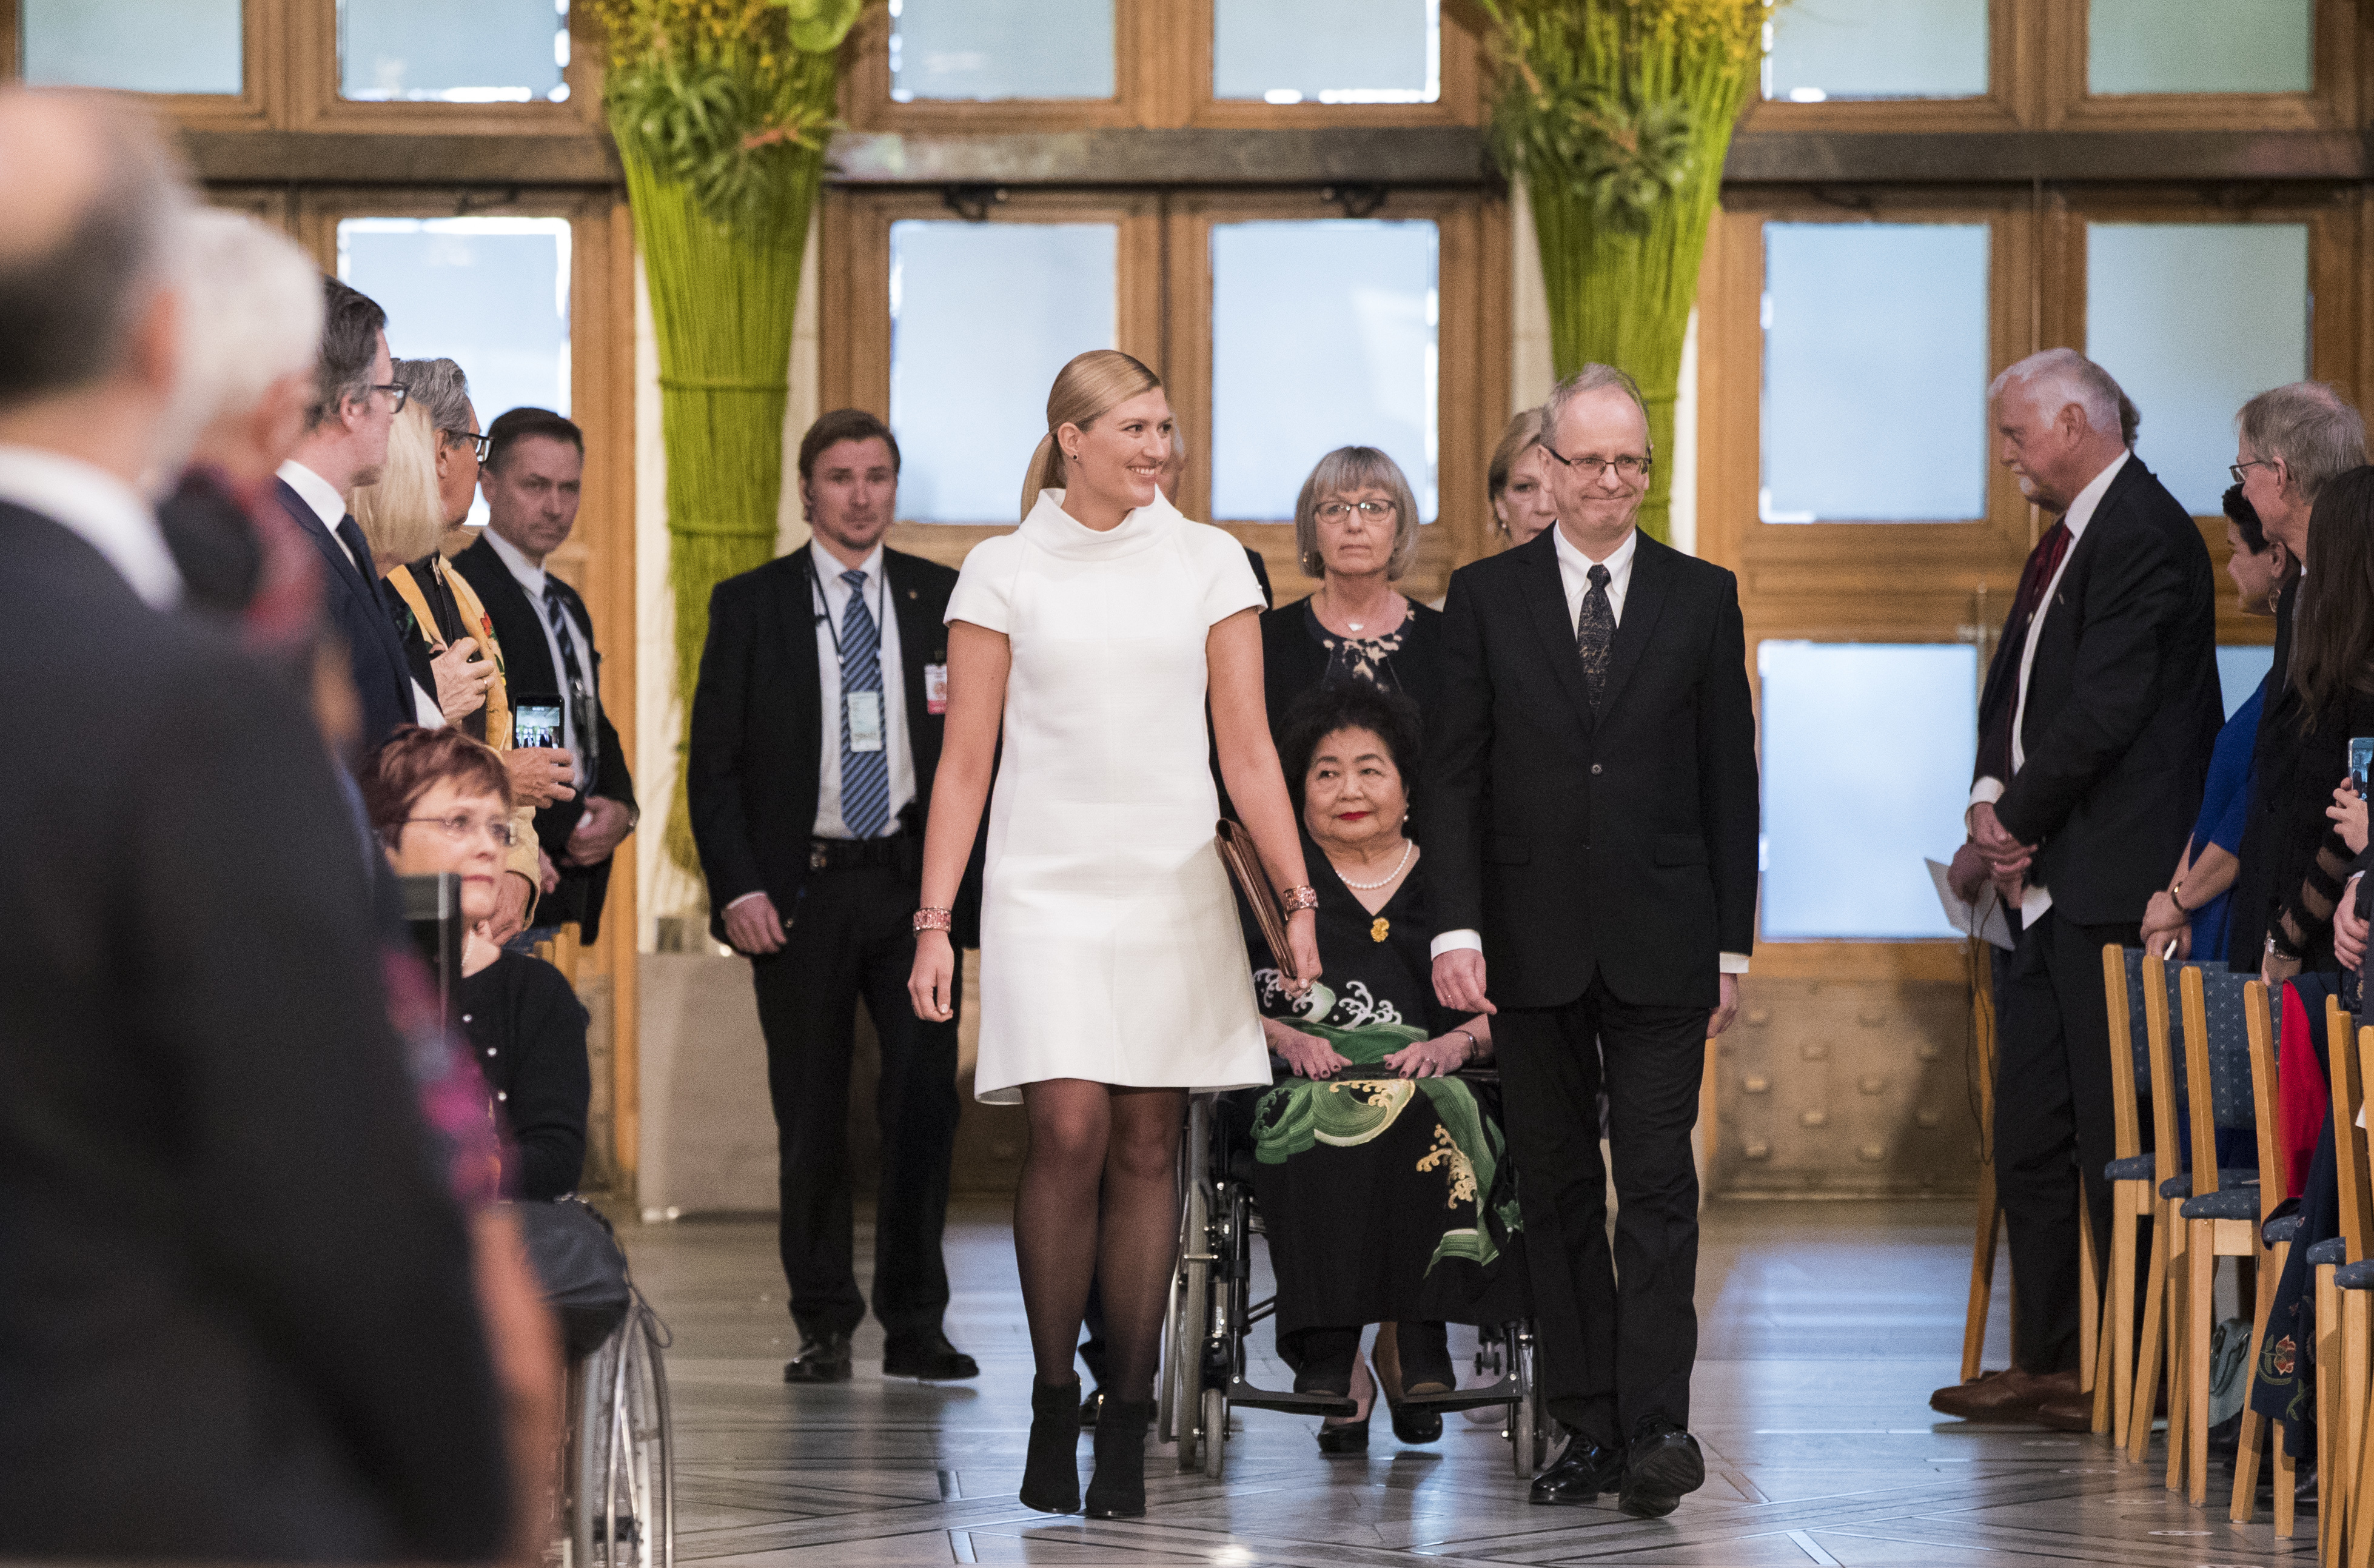 Hiroshima Survivor Setsuko Thurlow and Beatrice Fihn, leader of International Campaign to Abolish Nuclear Weapons (ICAN) in Oslo City Hall on the occasion of the award ceremony of the Nobel Peace Prize to ICAN, in Oslo, Sunday, Dec. 10, 2017. At right is Henrik Syse, member of the Nobel committee. (Berit Roald/NTB Scanpix via AP)